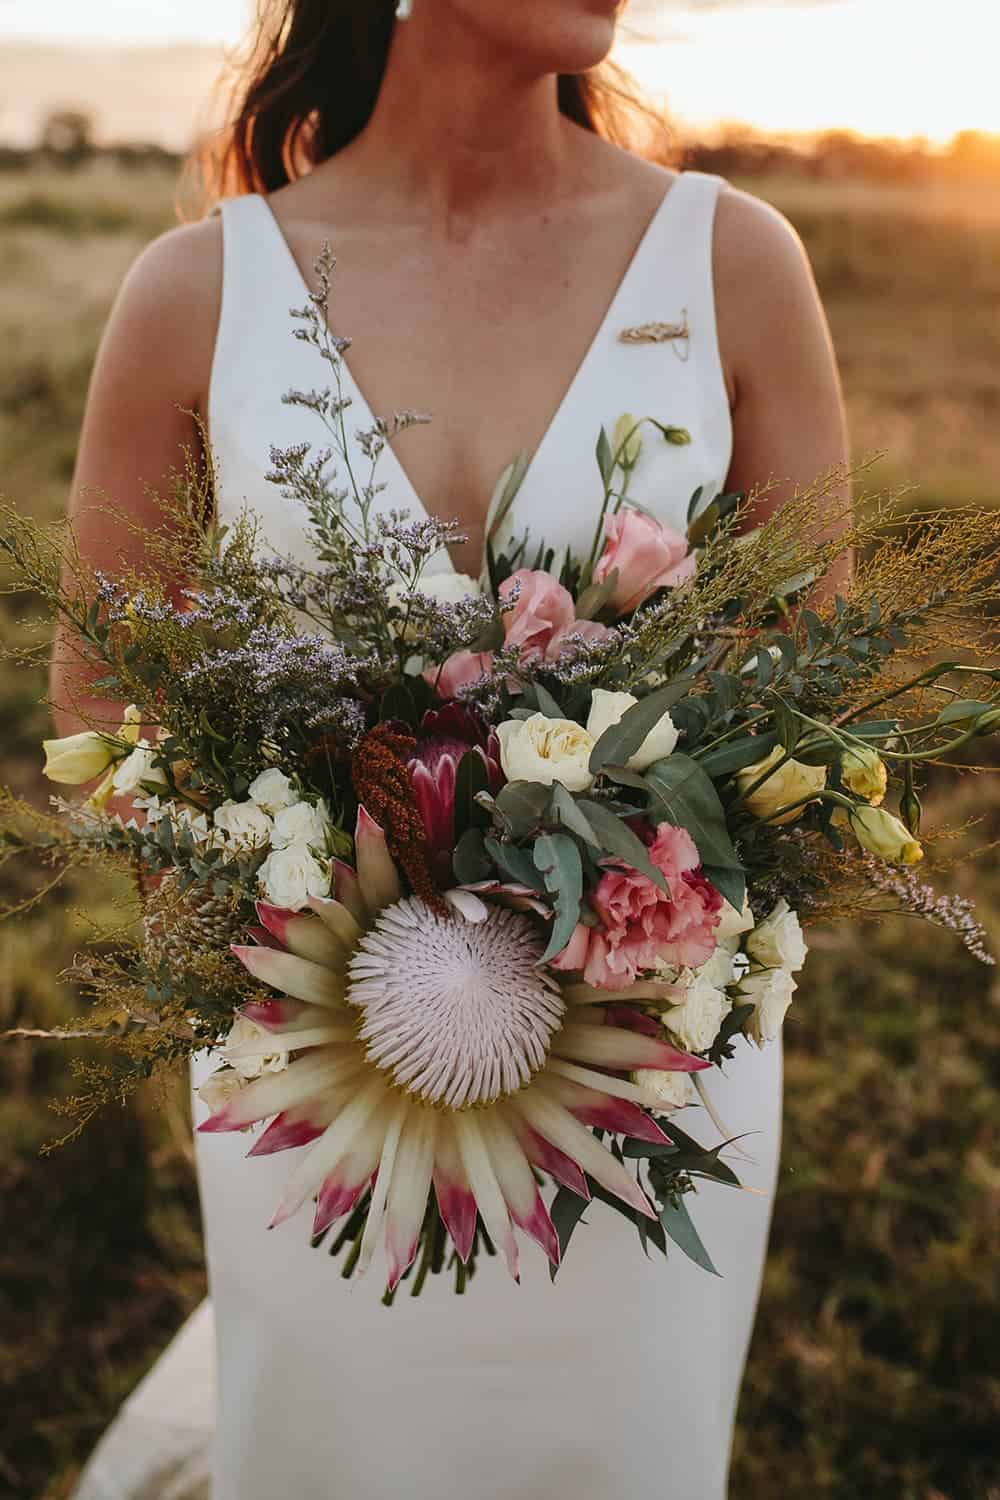 Close up image of a women in bridal gown holding floral bouquet